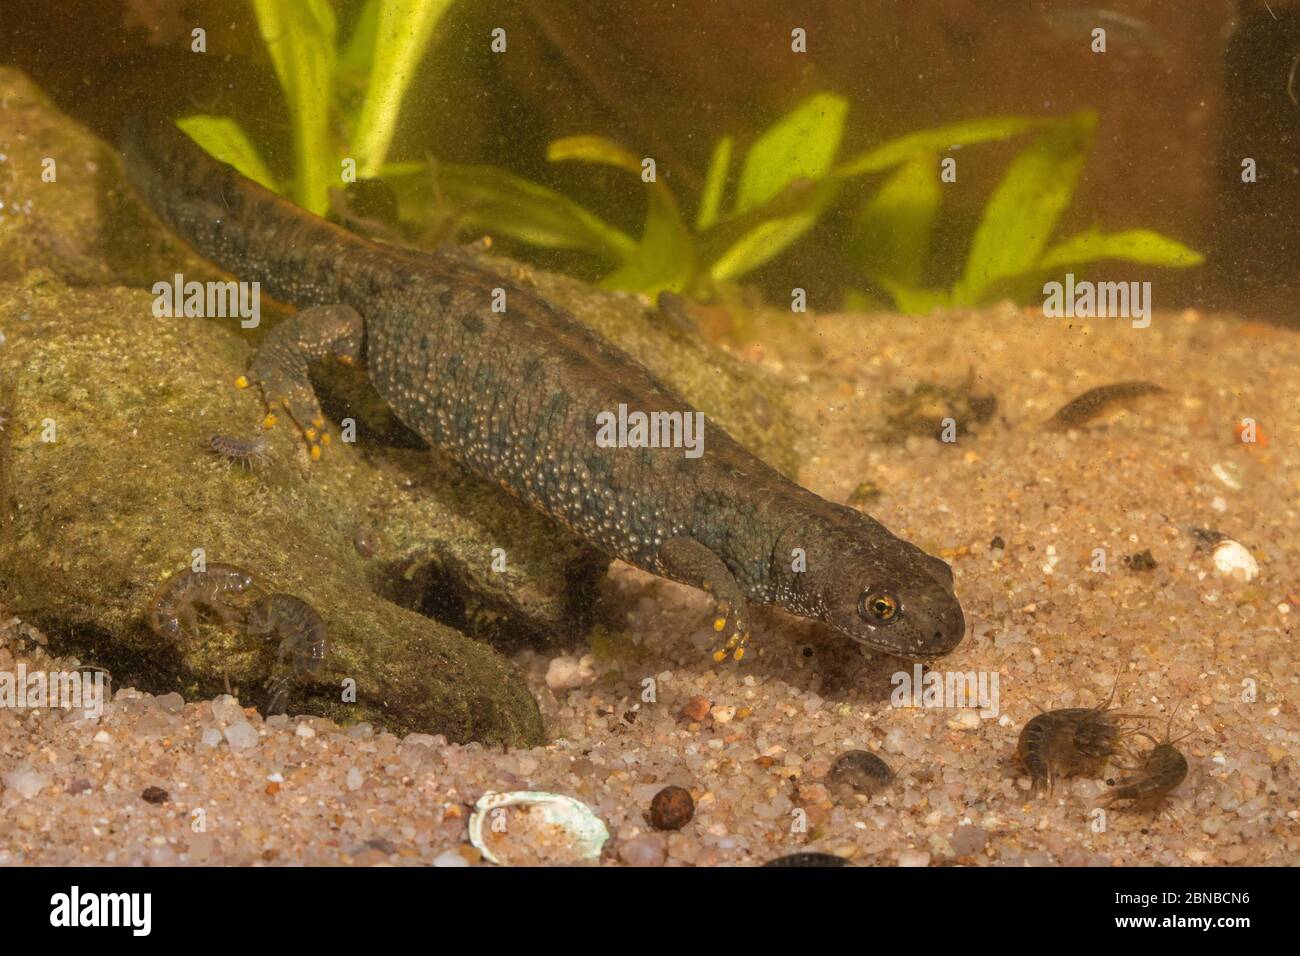 warty newt, crested newt, European crested newt (Triturus cristatus), hunting amphipods, Germany Stock Photo